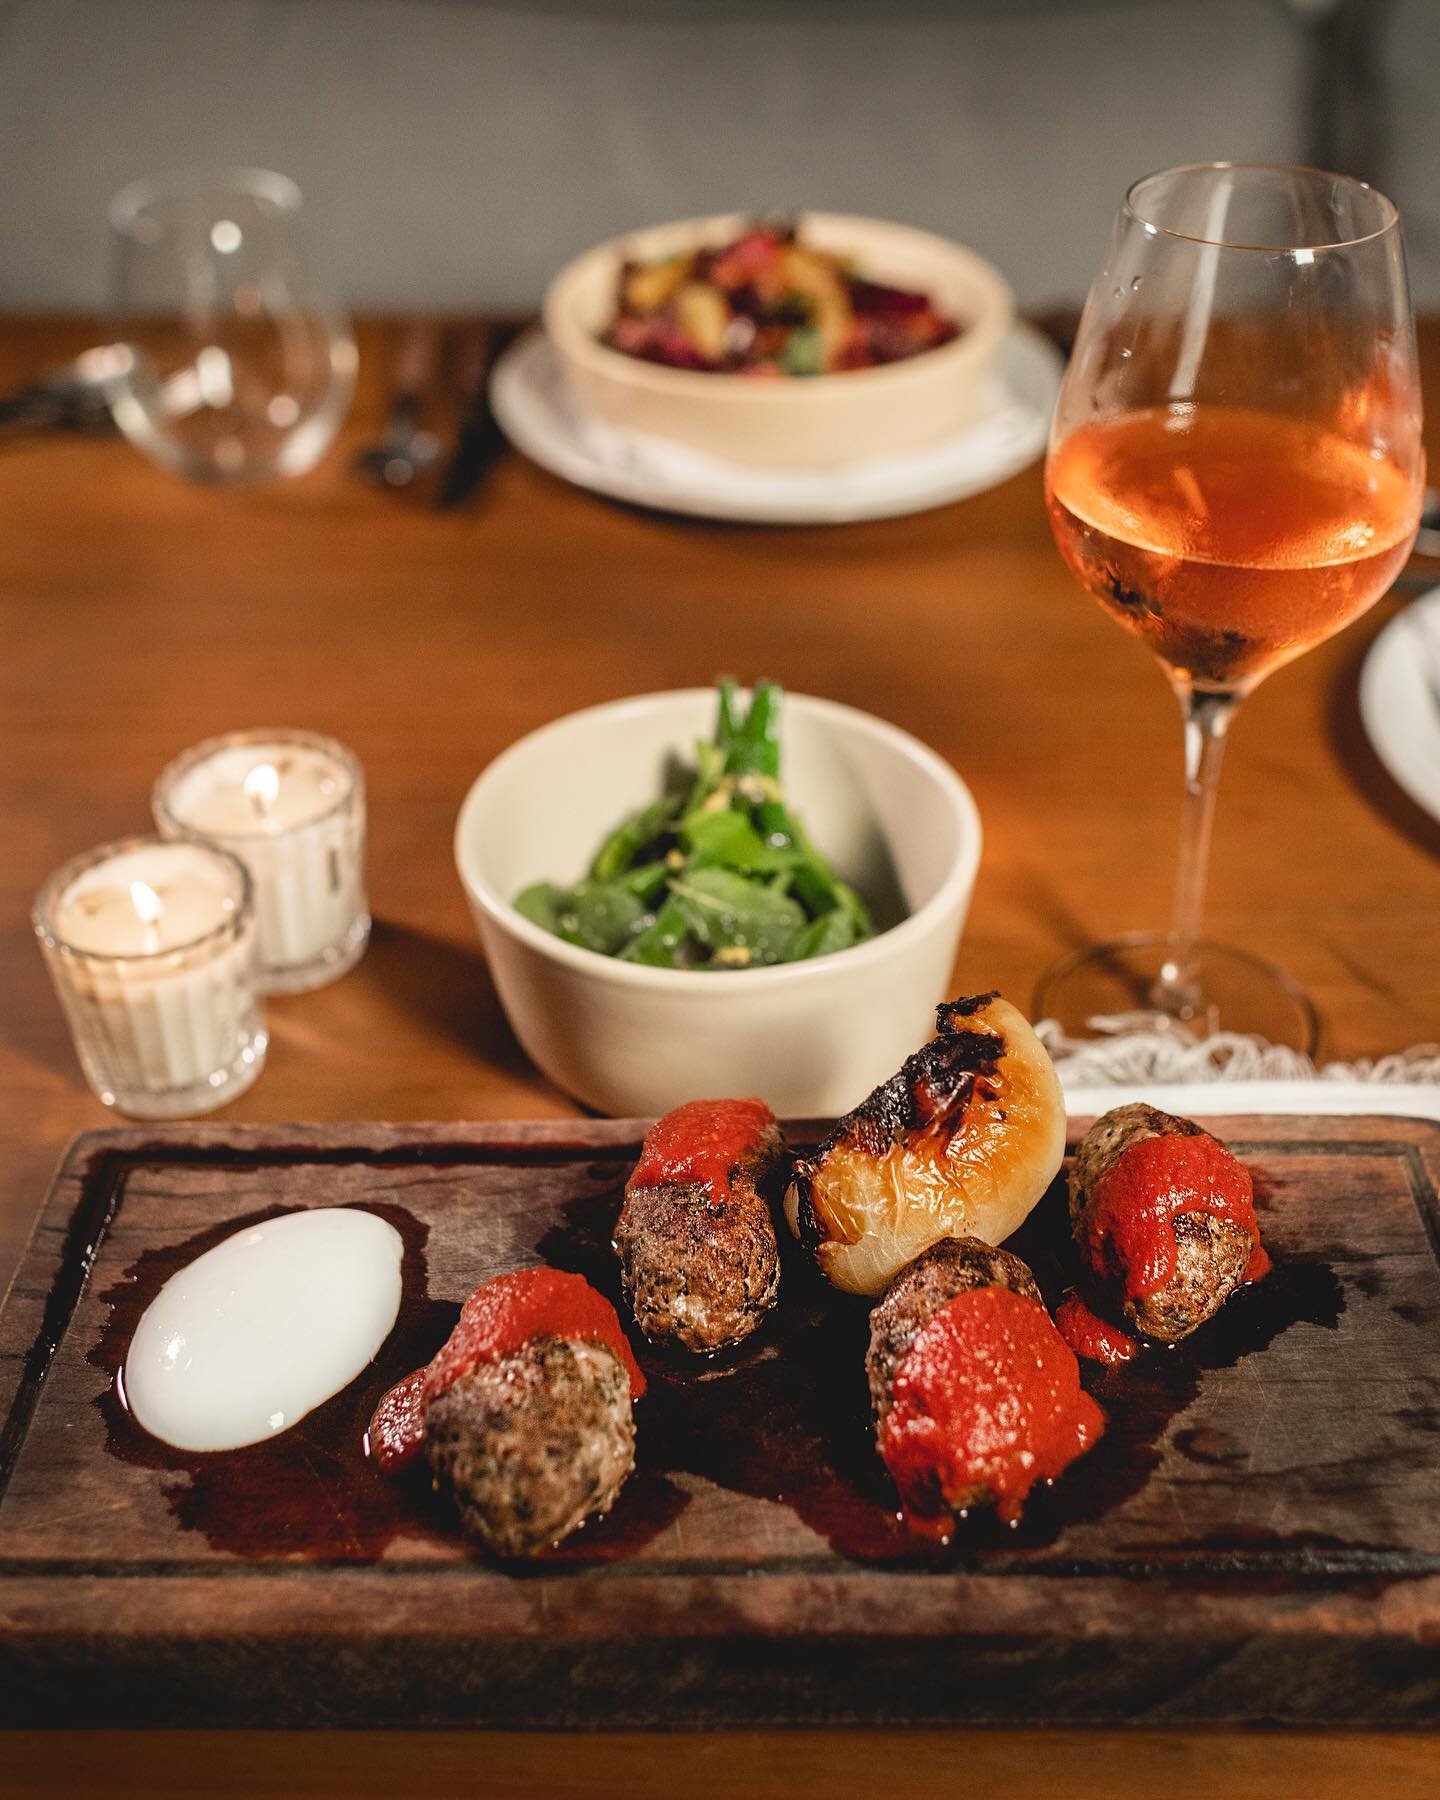 A FIRE-GRILLED FEAST

Sink your teeth into our juicy lamb meatballs and wash it down with a cool, crisp glass of rose. This is the life!

Reserve a table at MEZE and let's indulge together. Open from 6pm, bookings at GITANO.com

#meze #mediterranean 